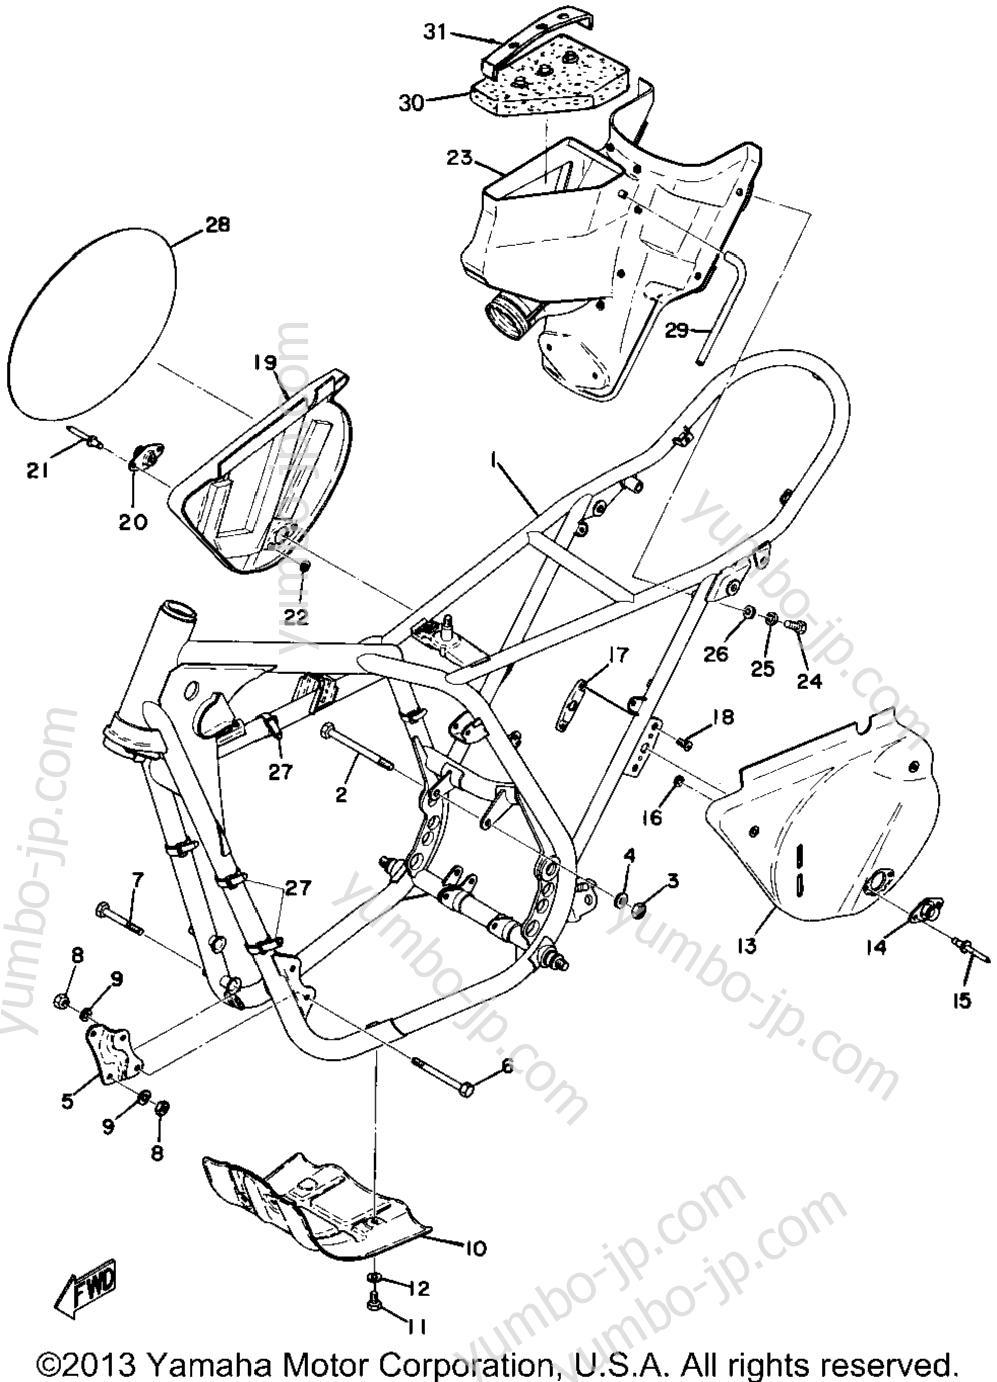 Frame - Side Cover for motorcycles YAMAHA MX250A 1974 year